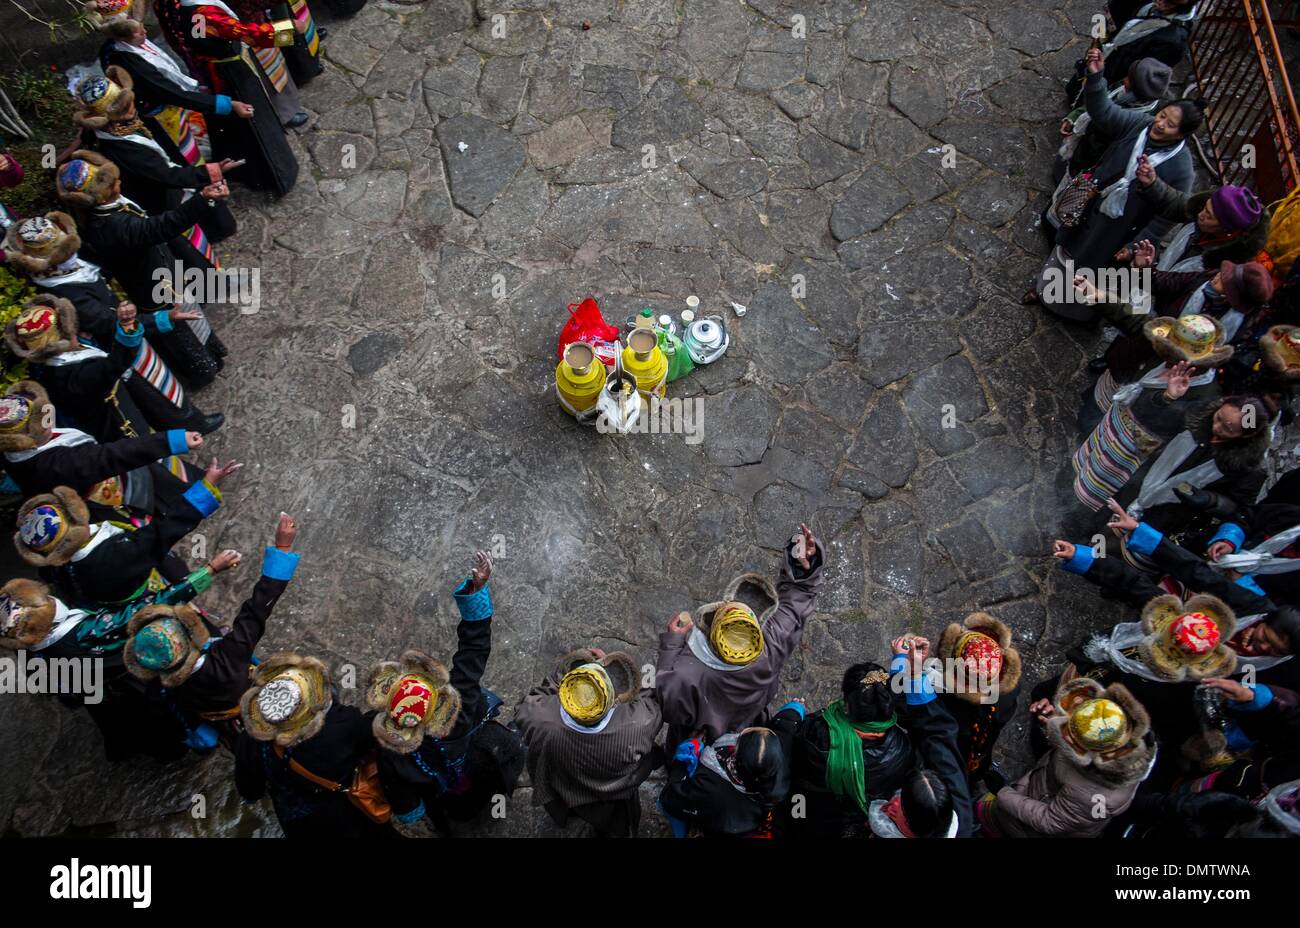 Lhasa, Tibet. 17th Dec, 2013. People pay homage to Palden Lhamo, a goddess in the Tibetan Buddhism, at the Jokhang Temple in Lhasa, capital of southwest China's Tibet Autonomous Region, Dec. 17, 2013. The Palden Lhamo Festival, which falls on the 15th day of the 10th month of the Tibetan calender, is celebrated by the female followers of Tibetan Buddhism to pray for a satisfactory marriage each year. Credit:  Purbu Zhaxi/Xinhua/Alamy Live News Stock Photo